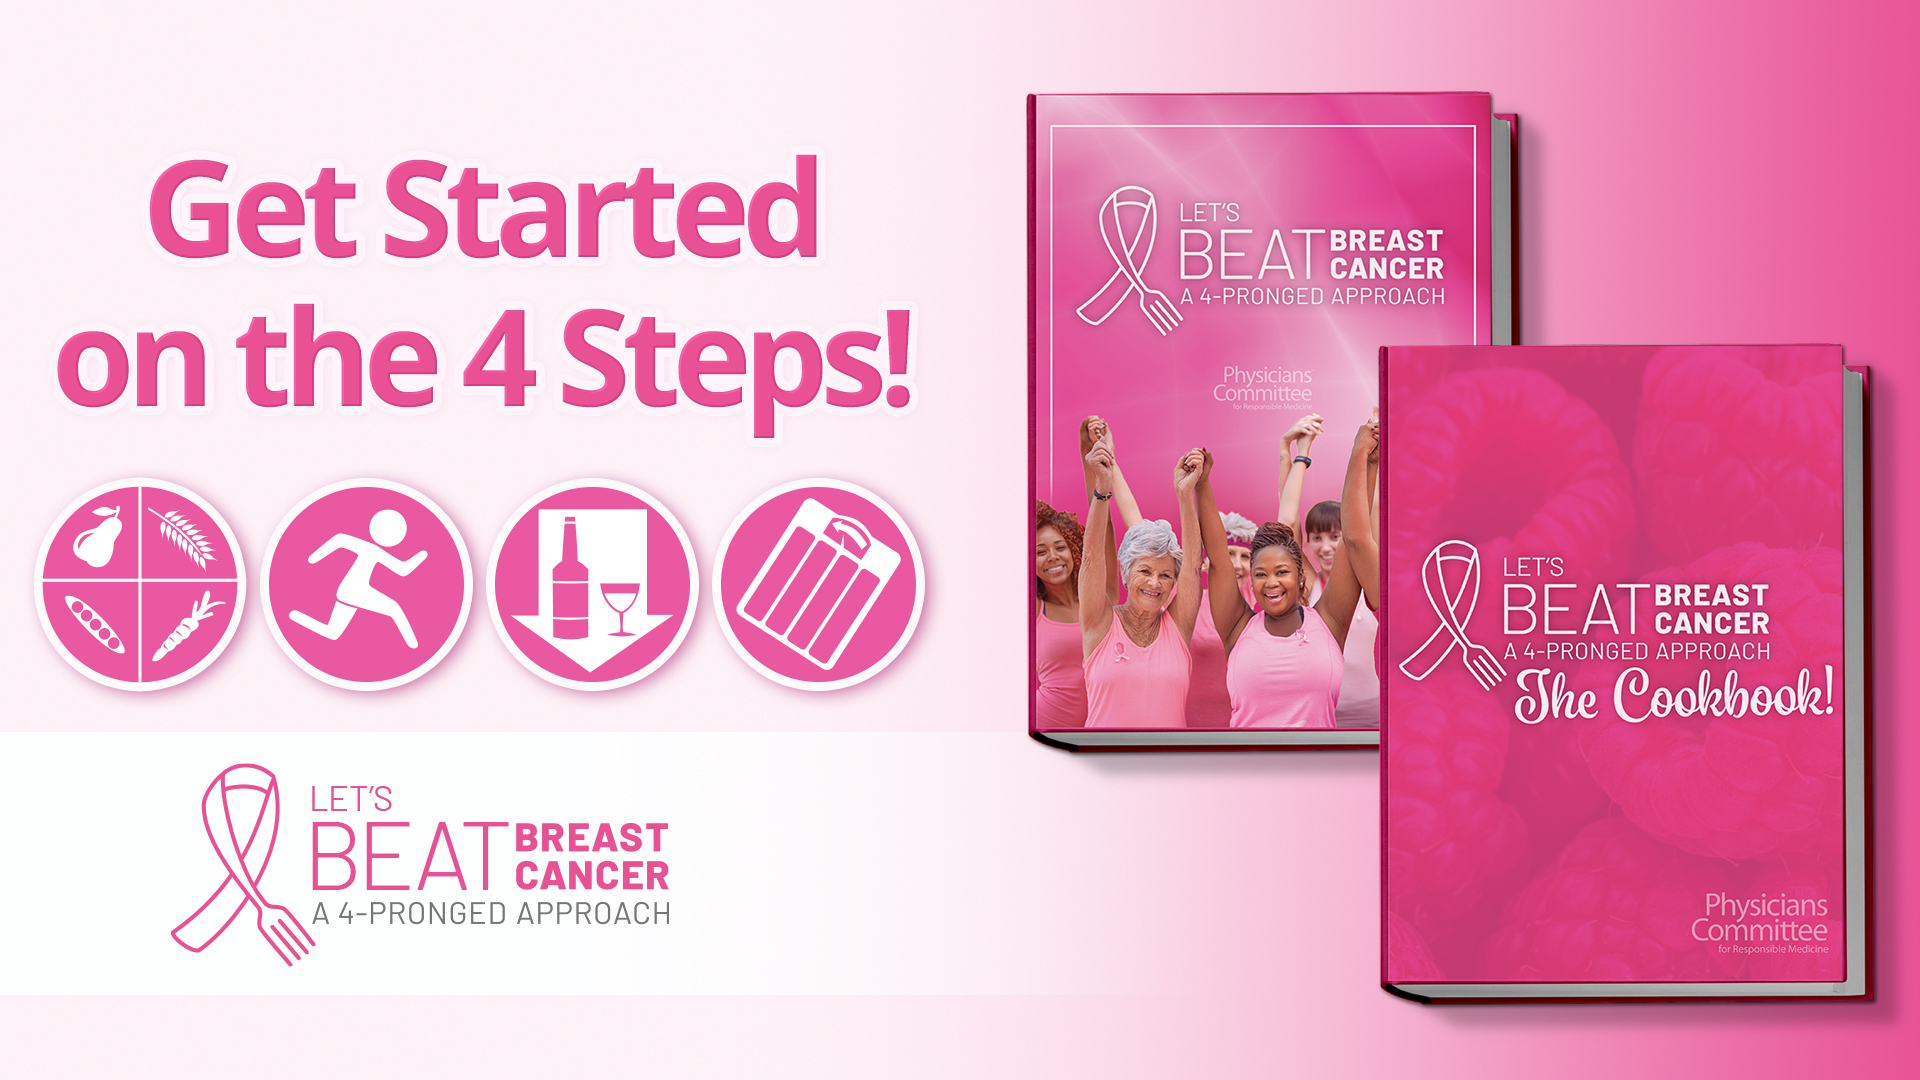 Get Started on the 4 Steps!